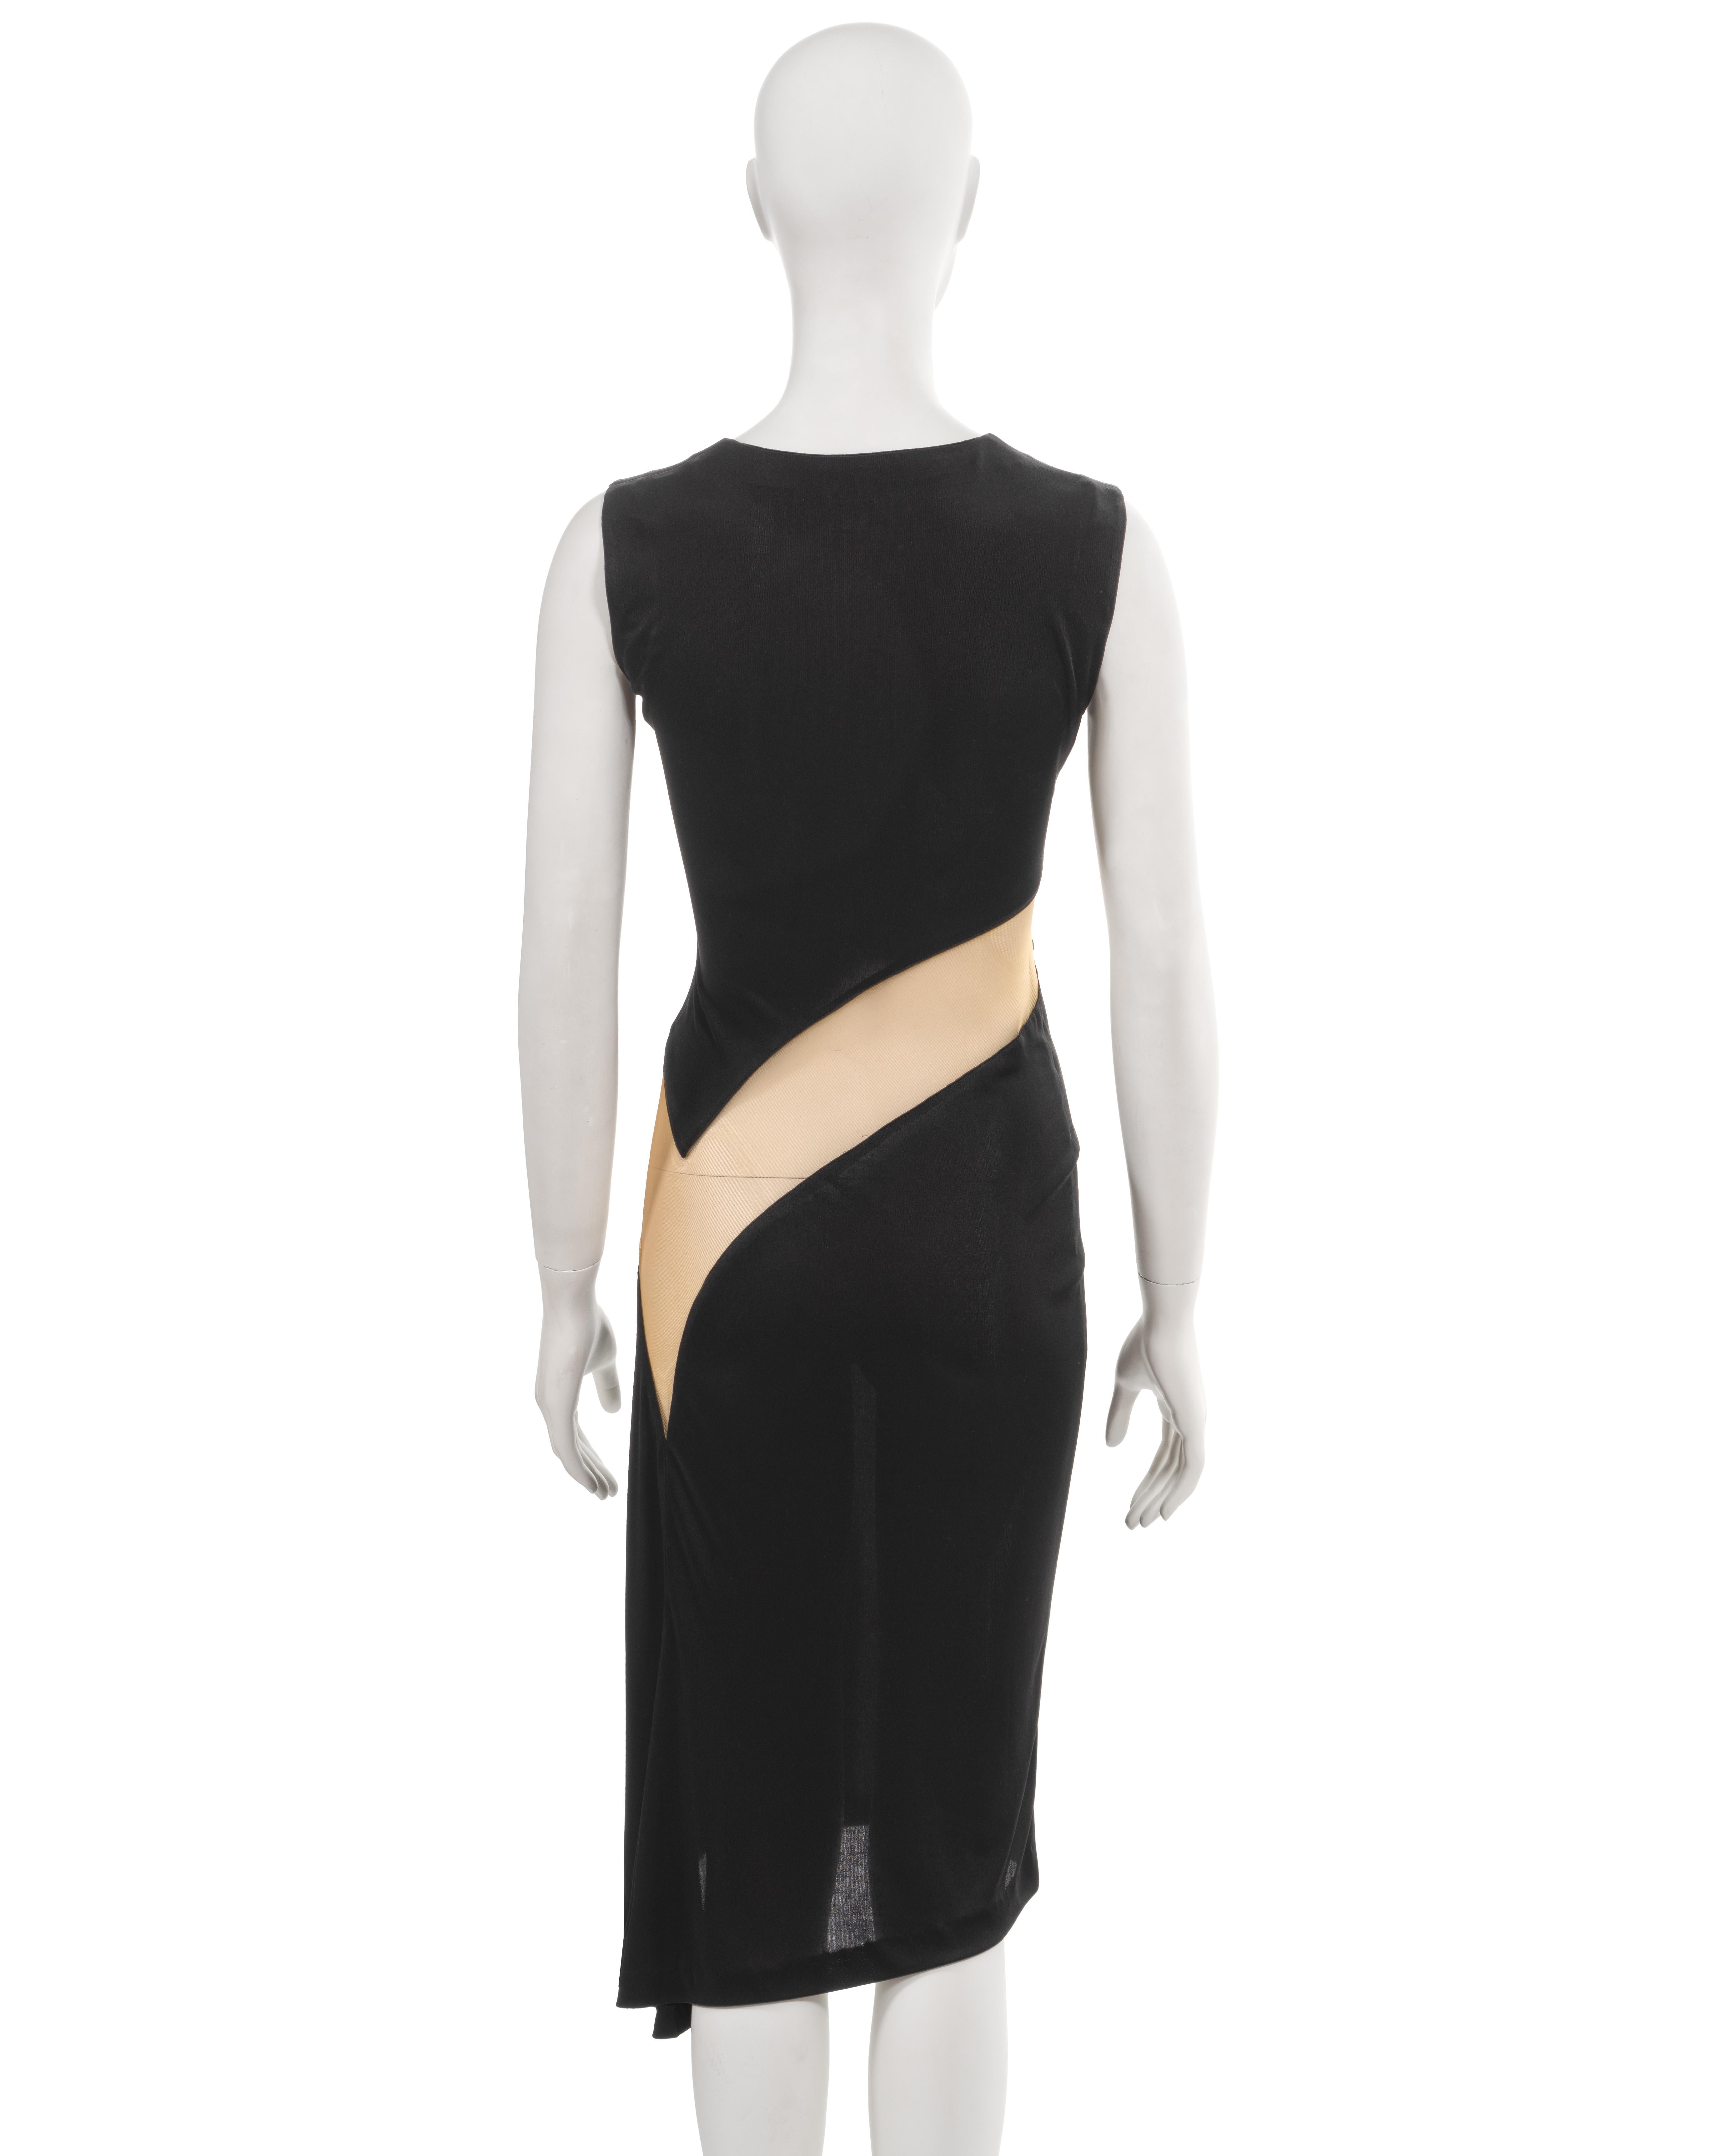 Alexander McQueen black acetate jersey dress with nude mesh insert, ss 1996 For Sale 4